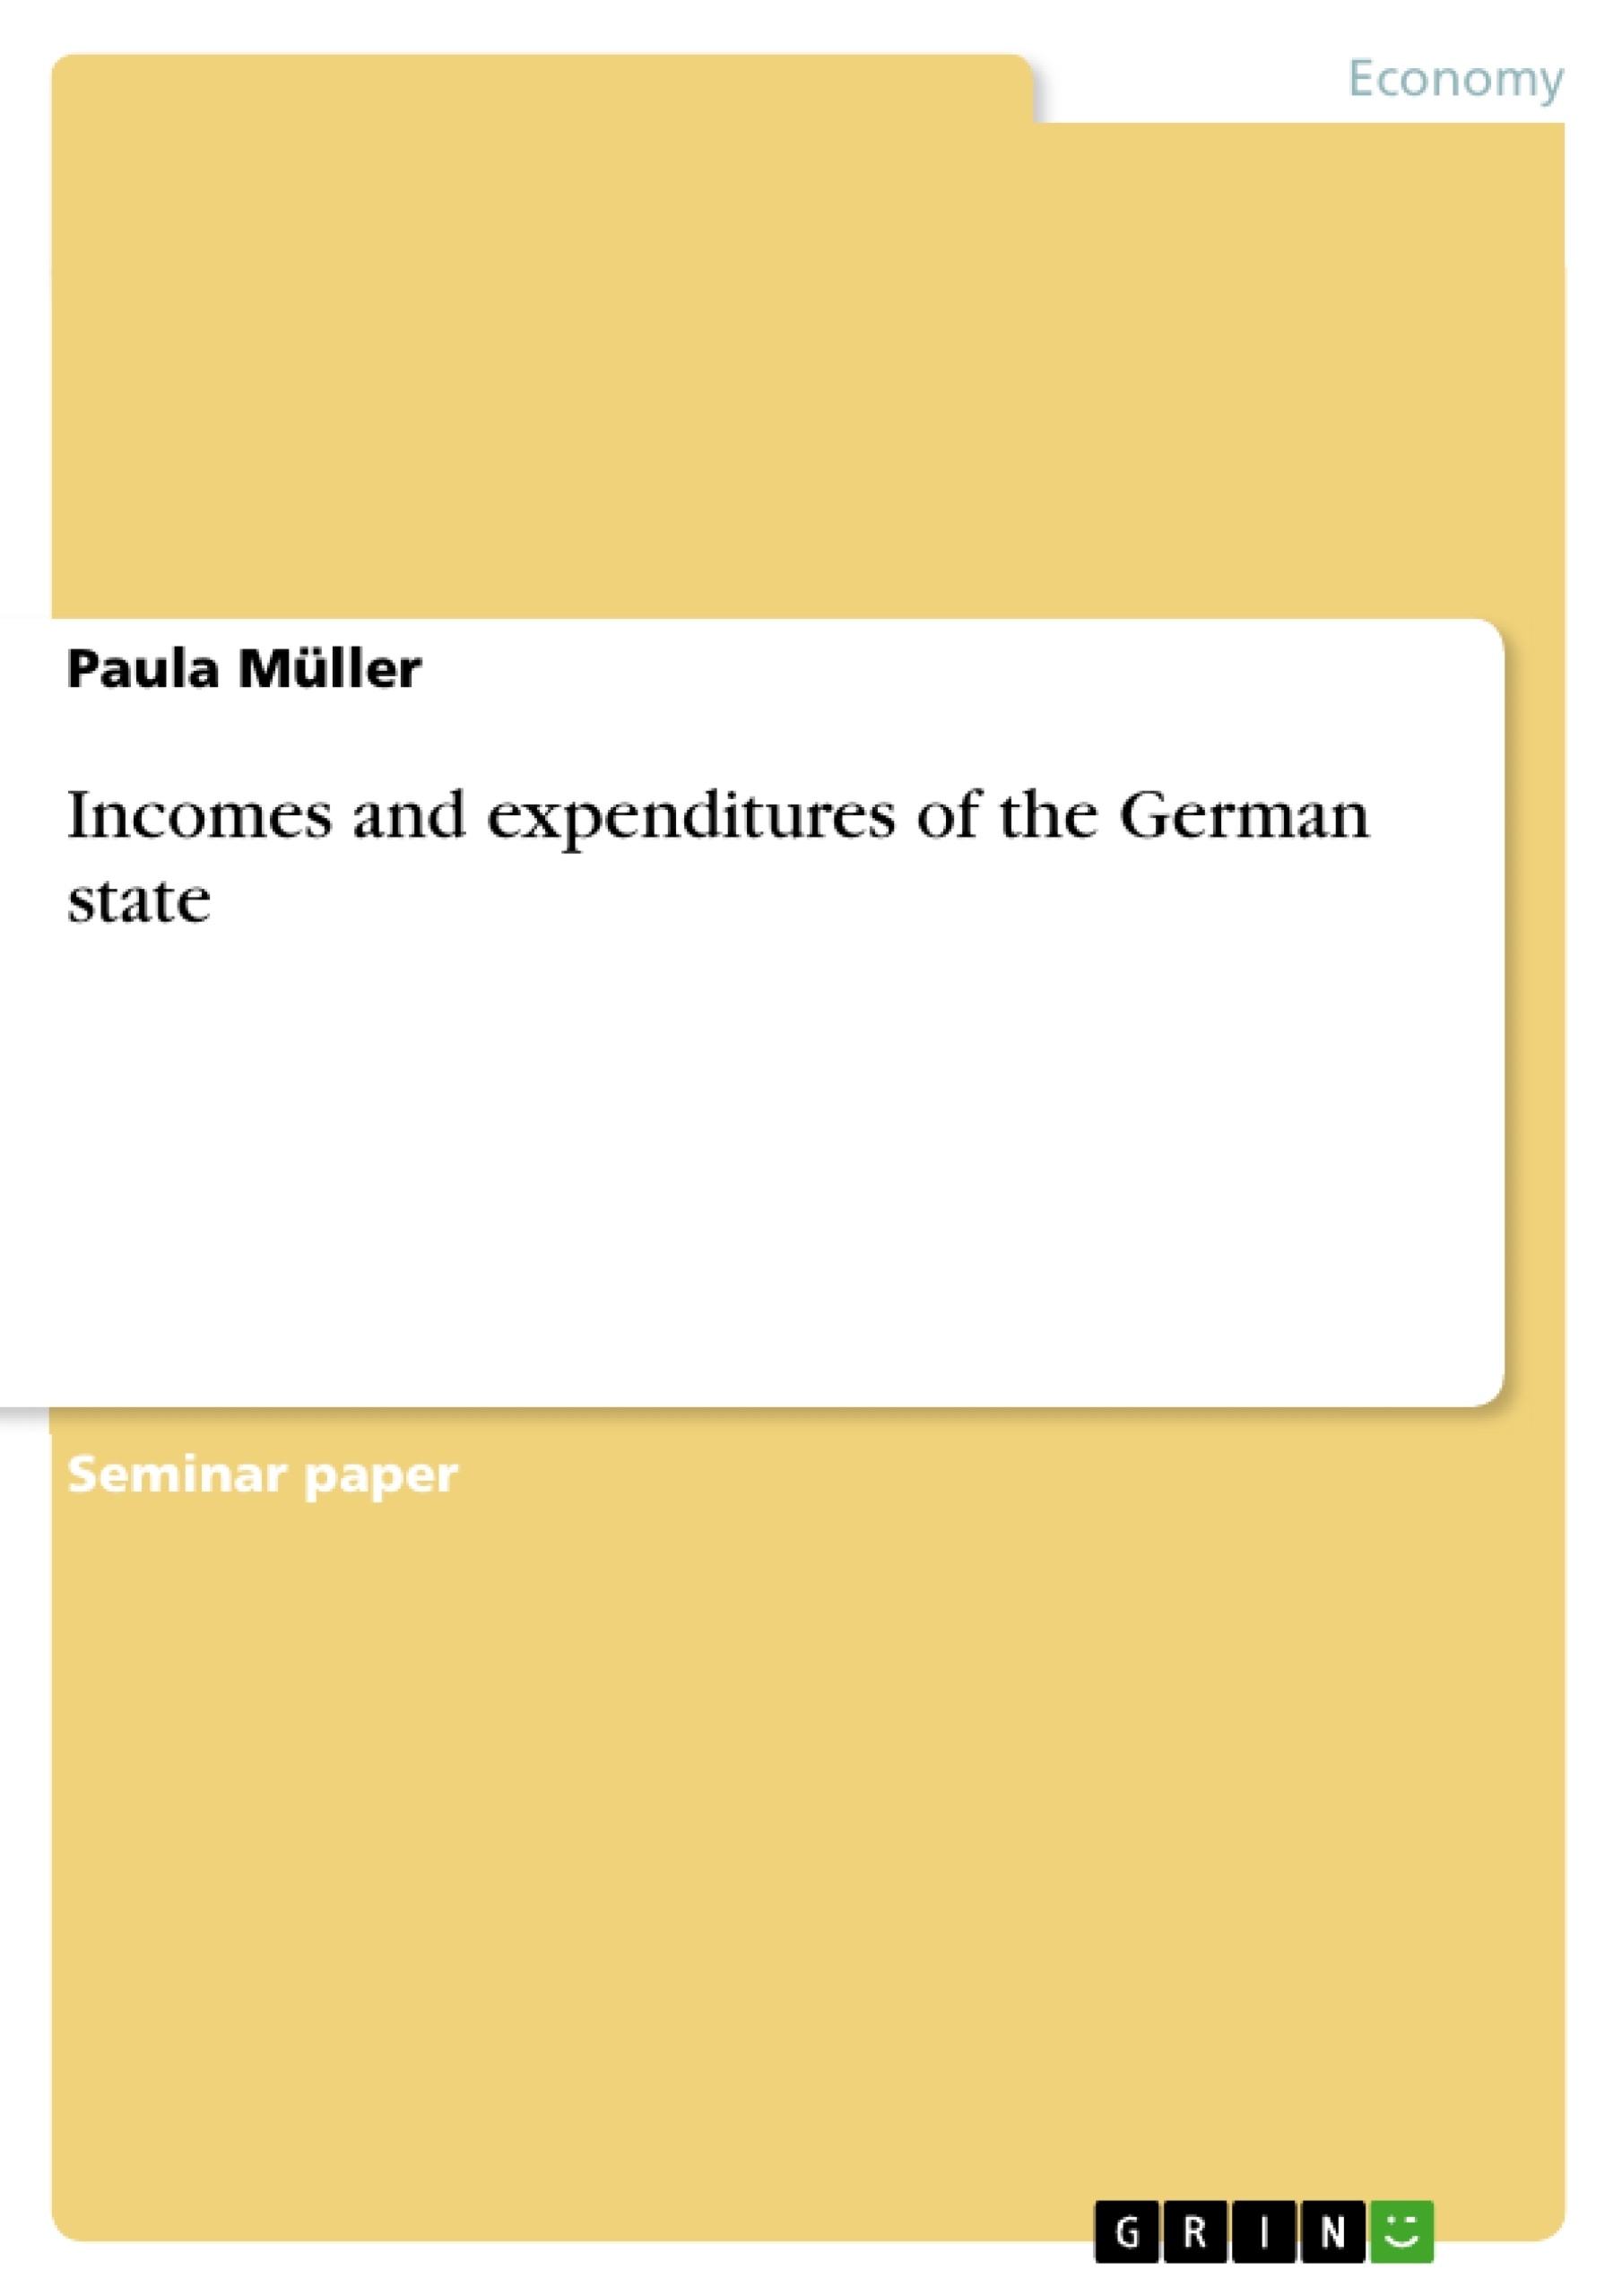 Titre: Incomes and expenditures of the German state